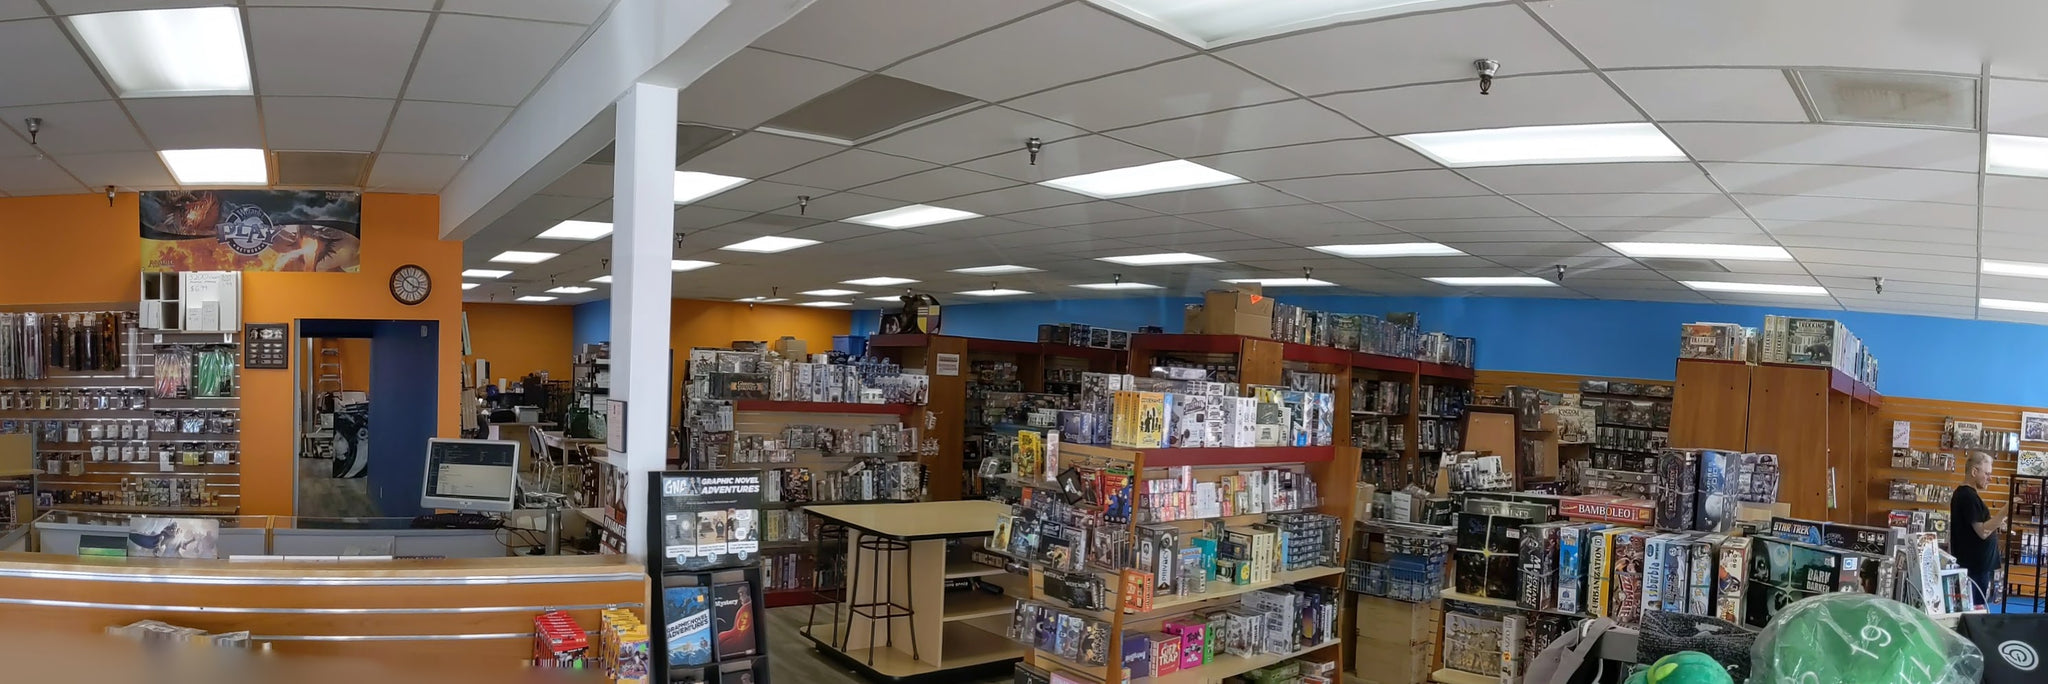 Isle of Games Store Retail Space